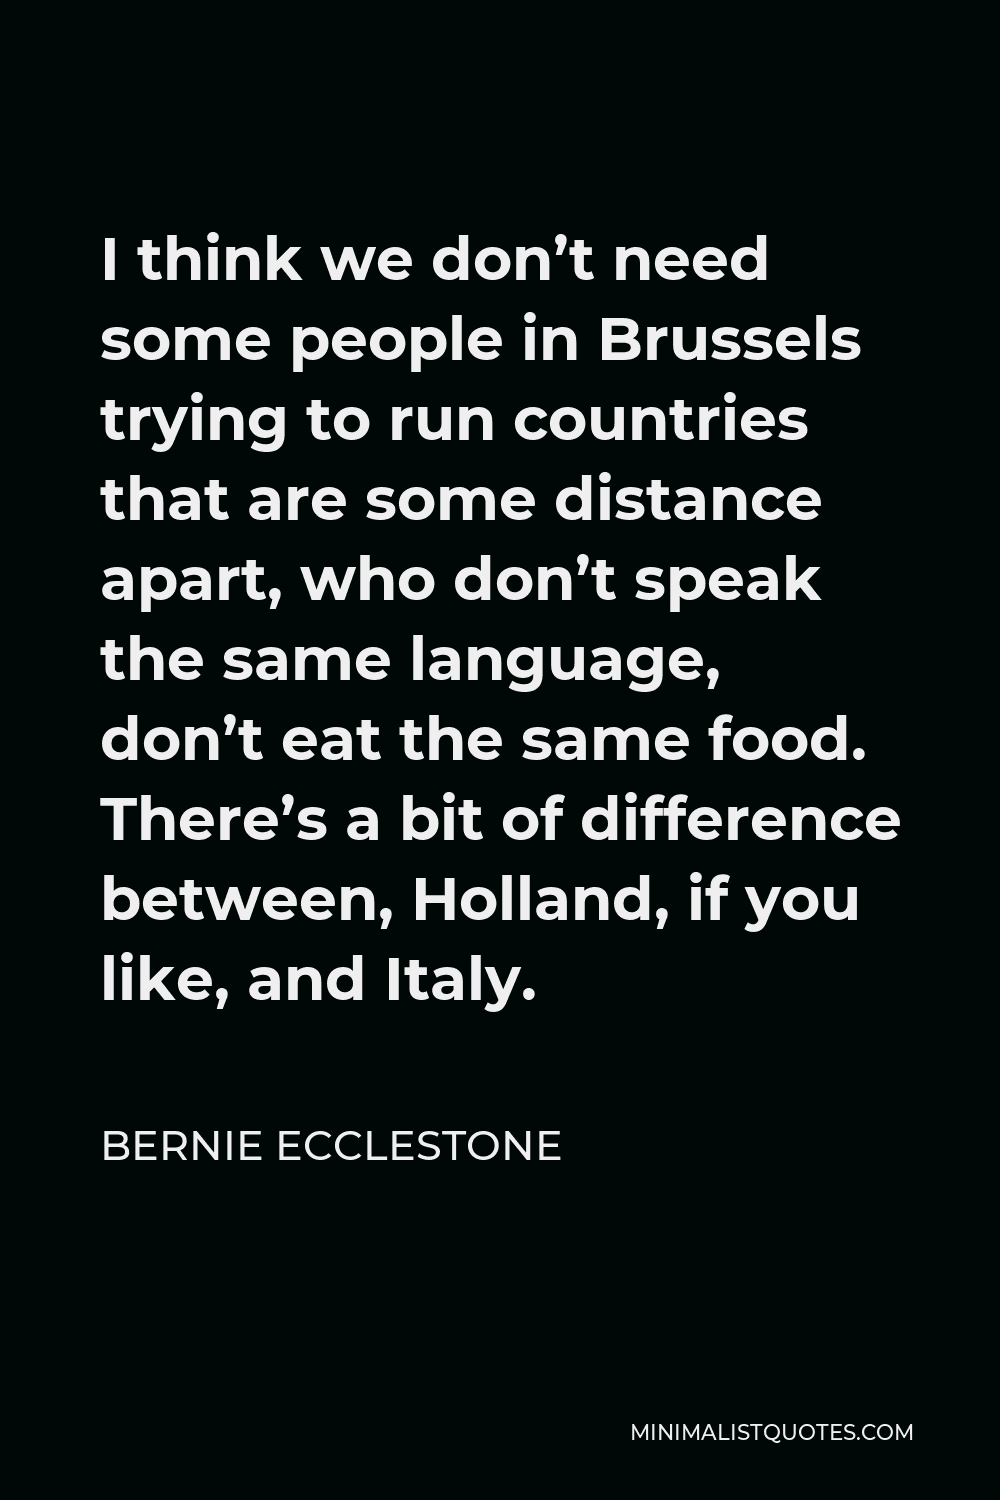 Bernie Ecclestone Quote - I think we don’t need some people in Brussels trying to run countries that are some distance apart, who don’t speak the same language, don’t eat the same food. There’s a bit of difference between, Holland, if you like, and Italy.